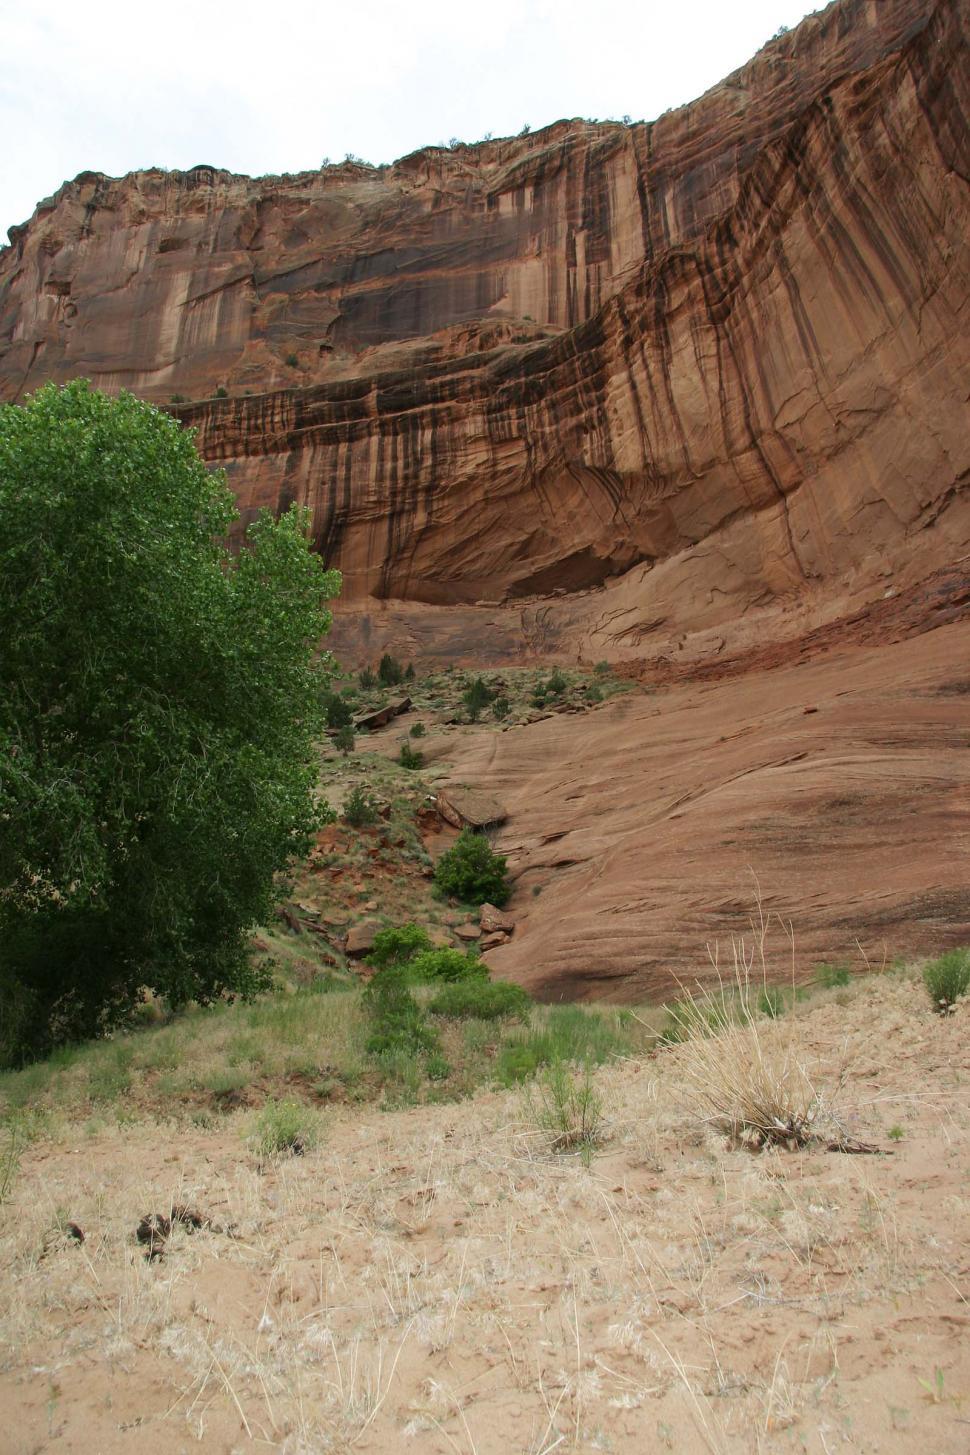 Free Image of cliff cliffs canyon de chelly chelly canyon de arizona indian native american monument national navajo southwest field 